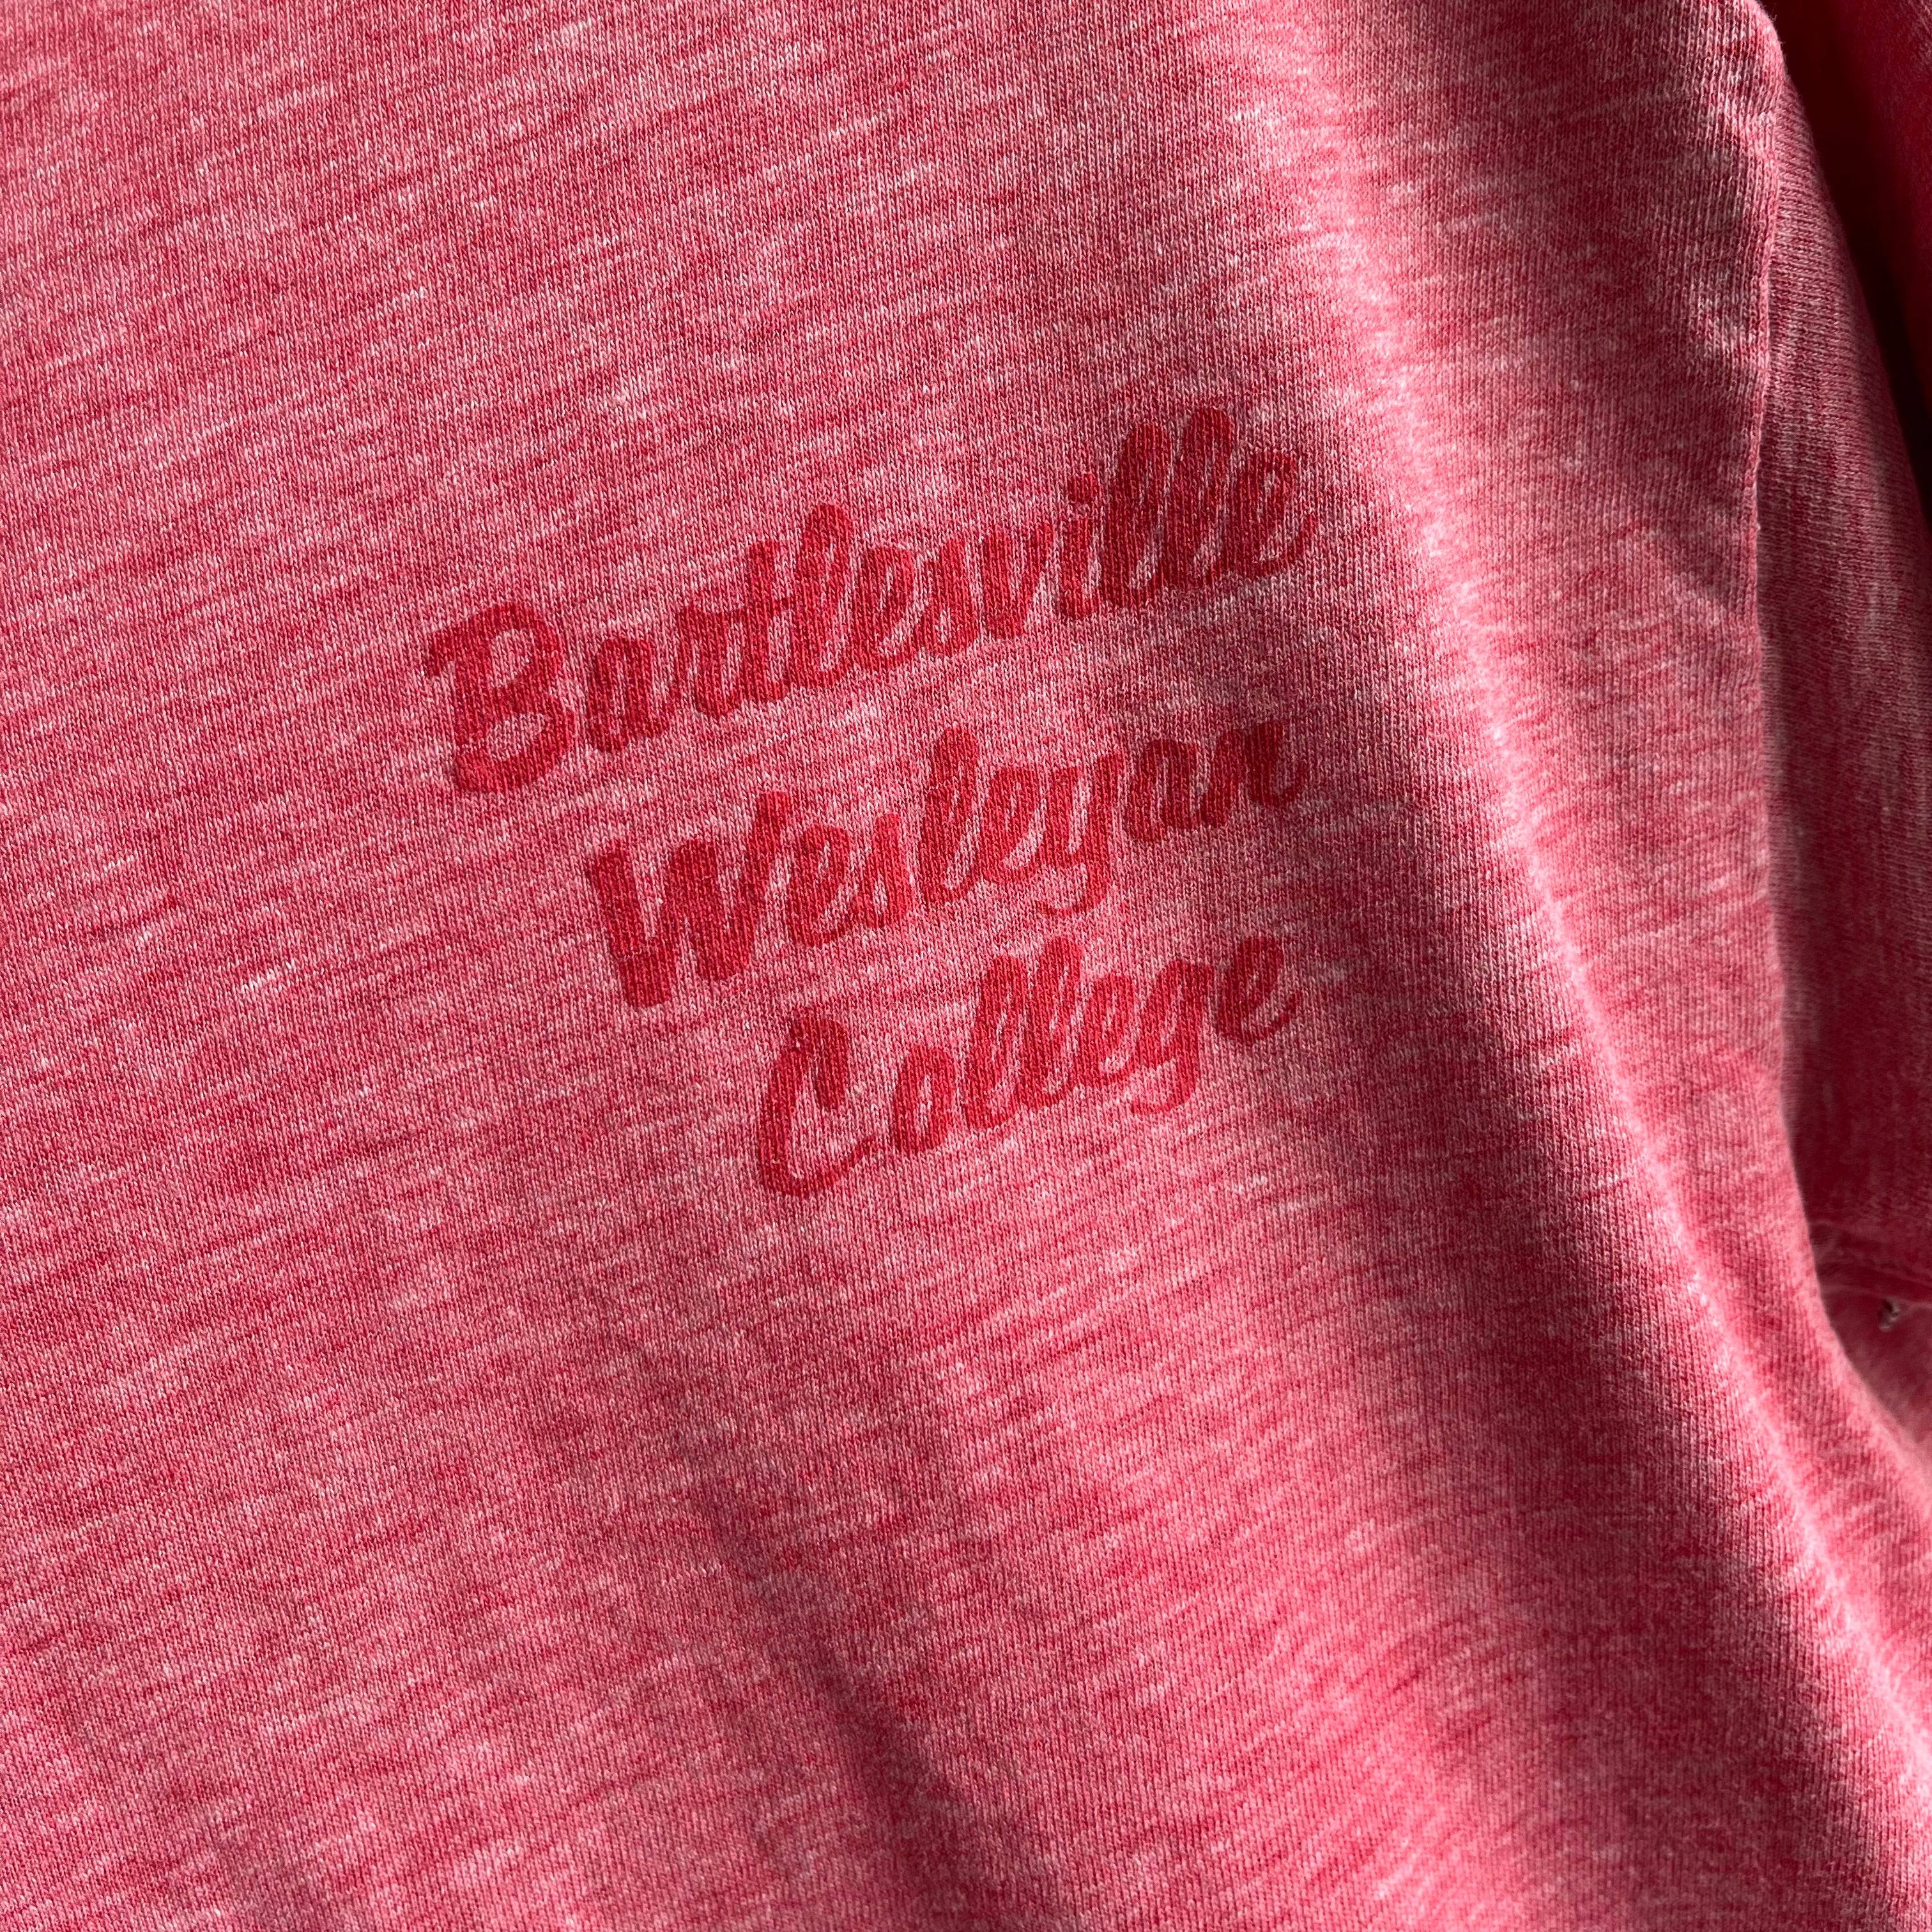 1970s Bartlesville Wesleyan College Tattered Thinned Out Ring T-Shirt